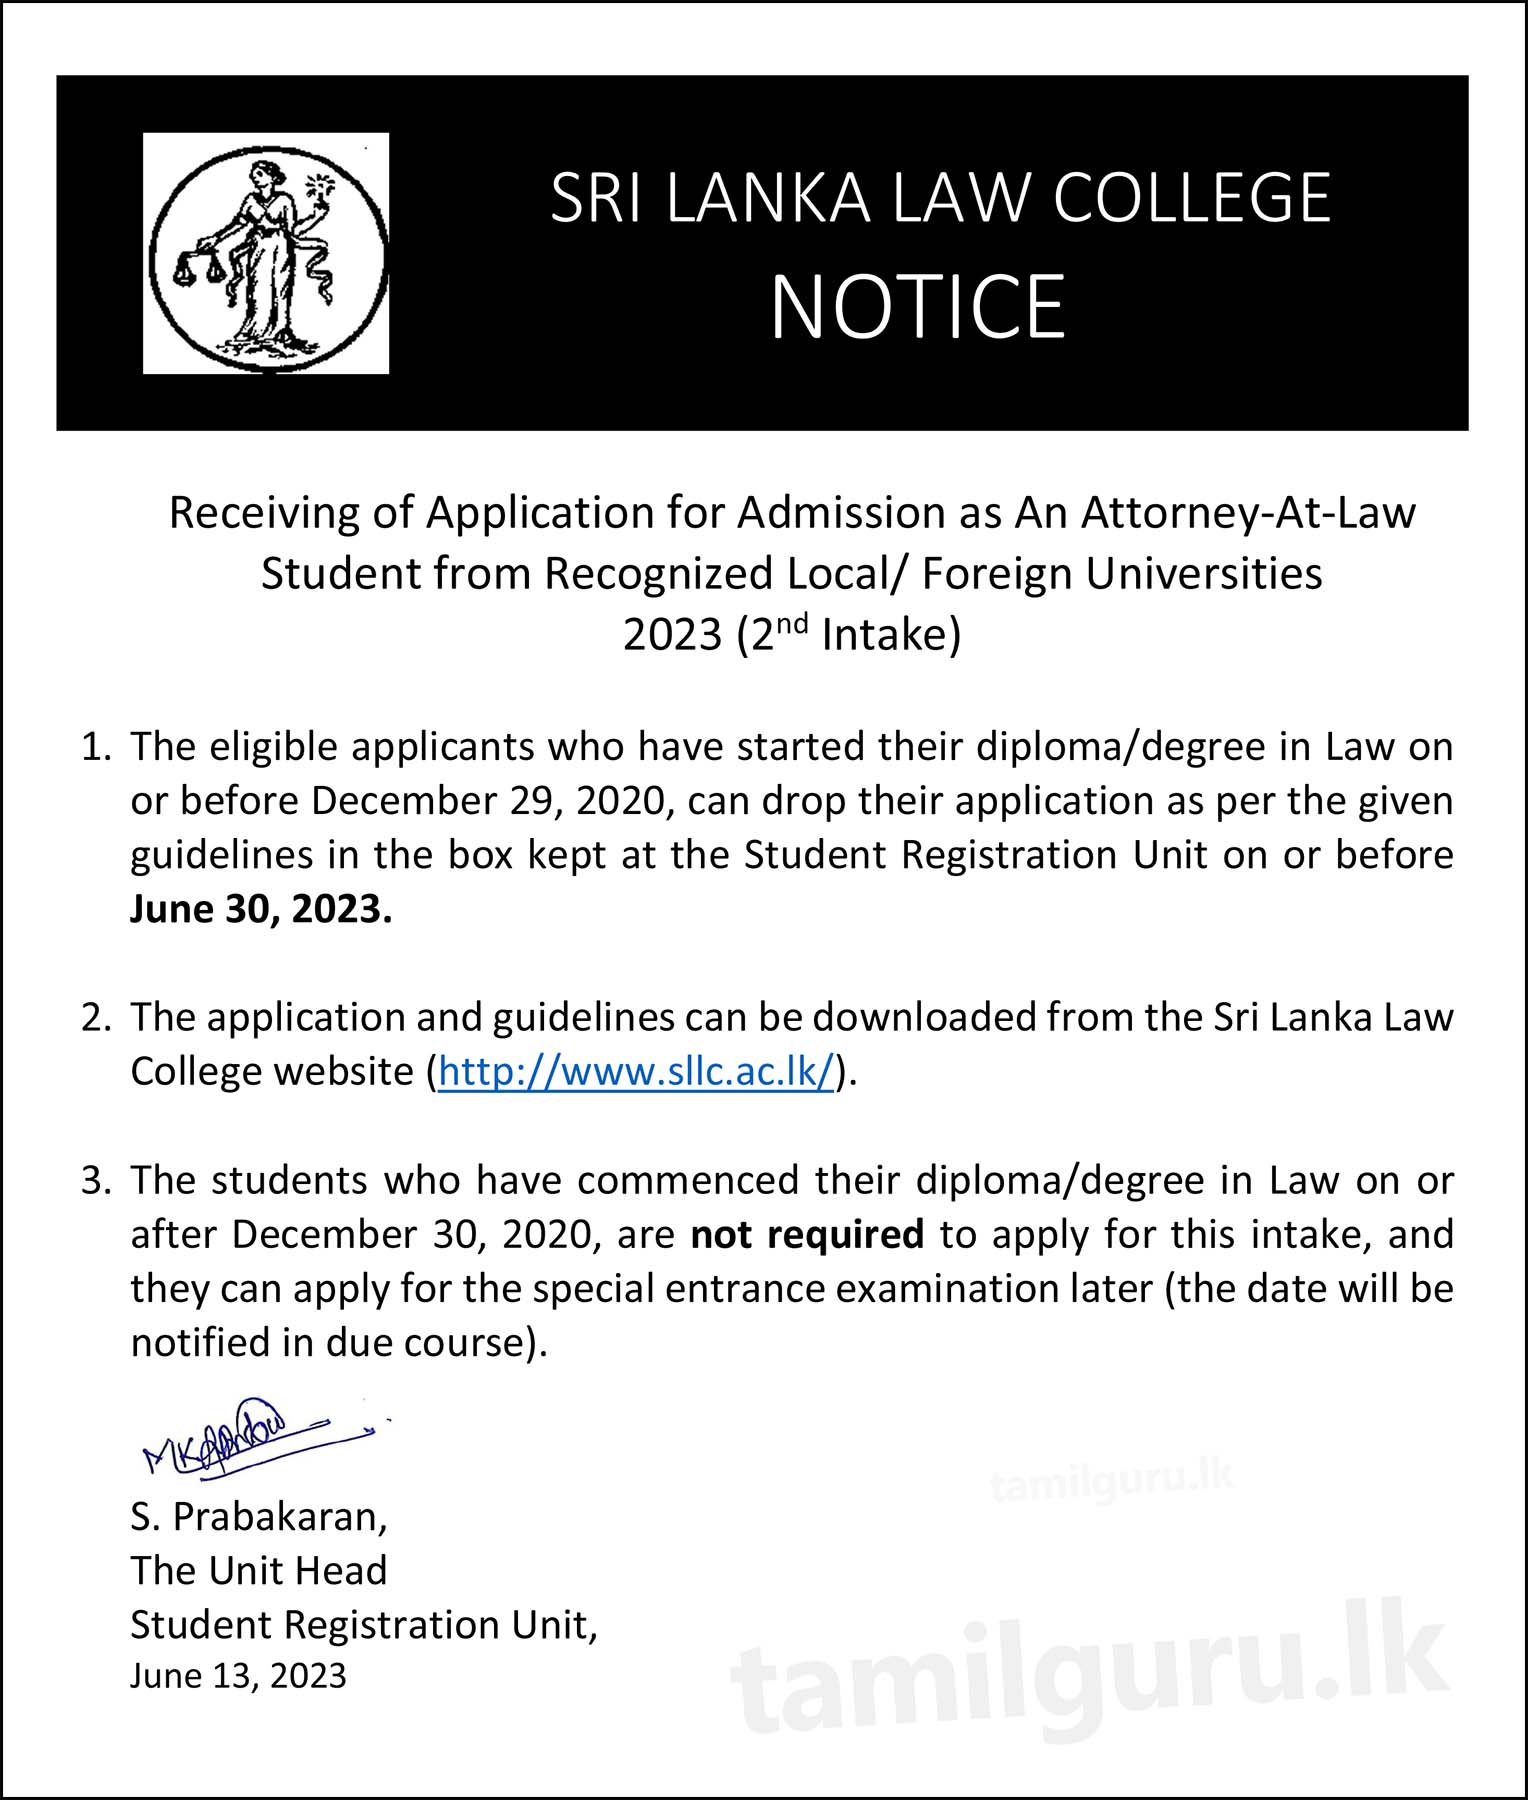 Sri Lanka Law College (SLLC) Admission for LLB Graduates and Barristers - 2023 (02nd Intake)